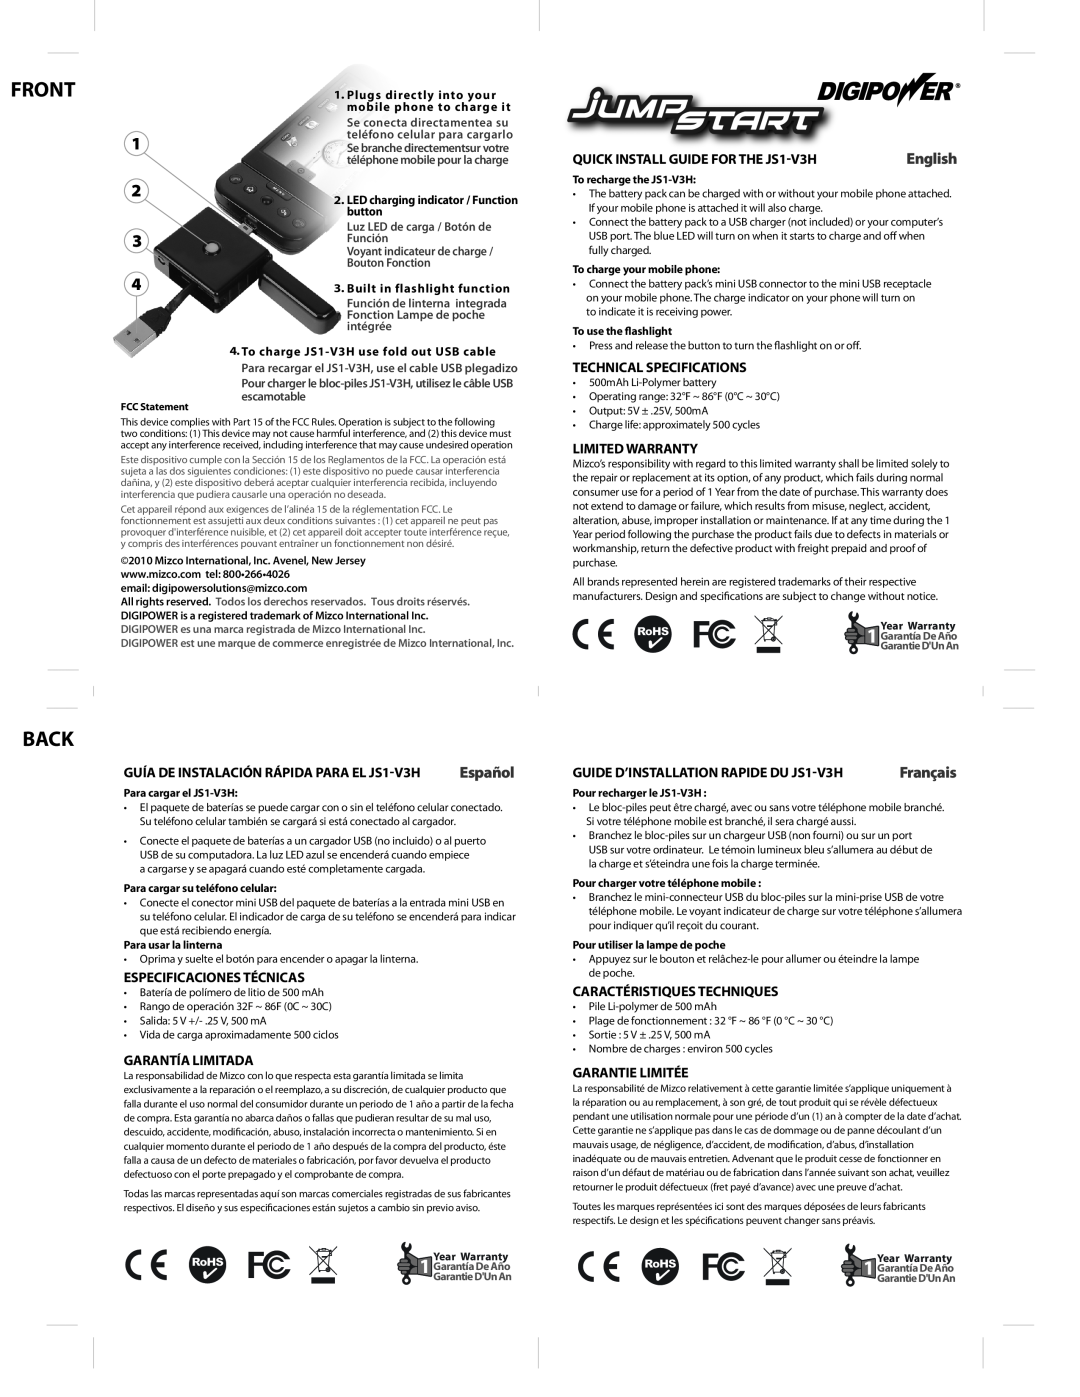 DigiPower JS1-VH3 technical specifications Front, Back, QUICK INSTALL GUIDE FOR THE JS1V3H, Technical Specifications 